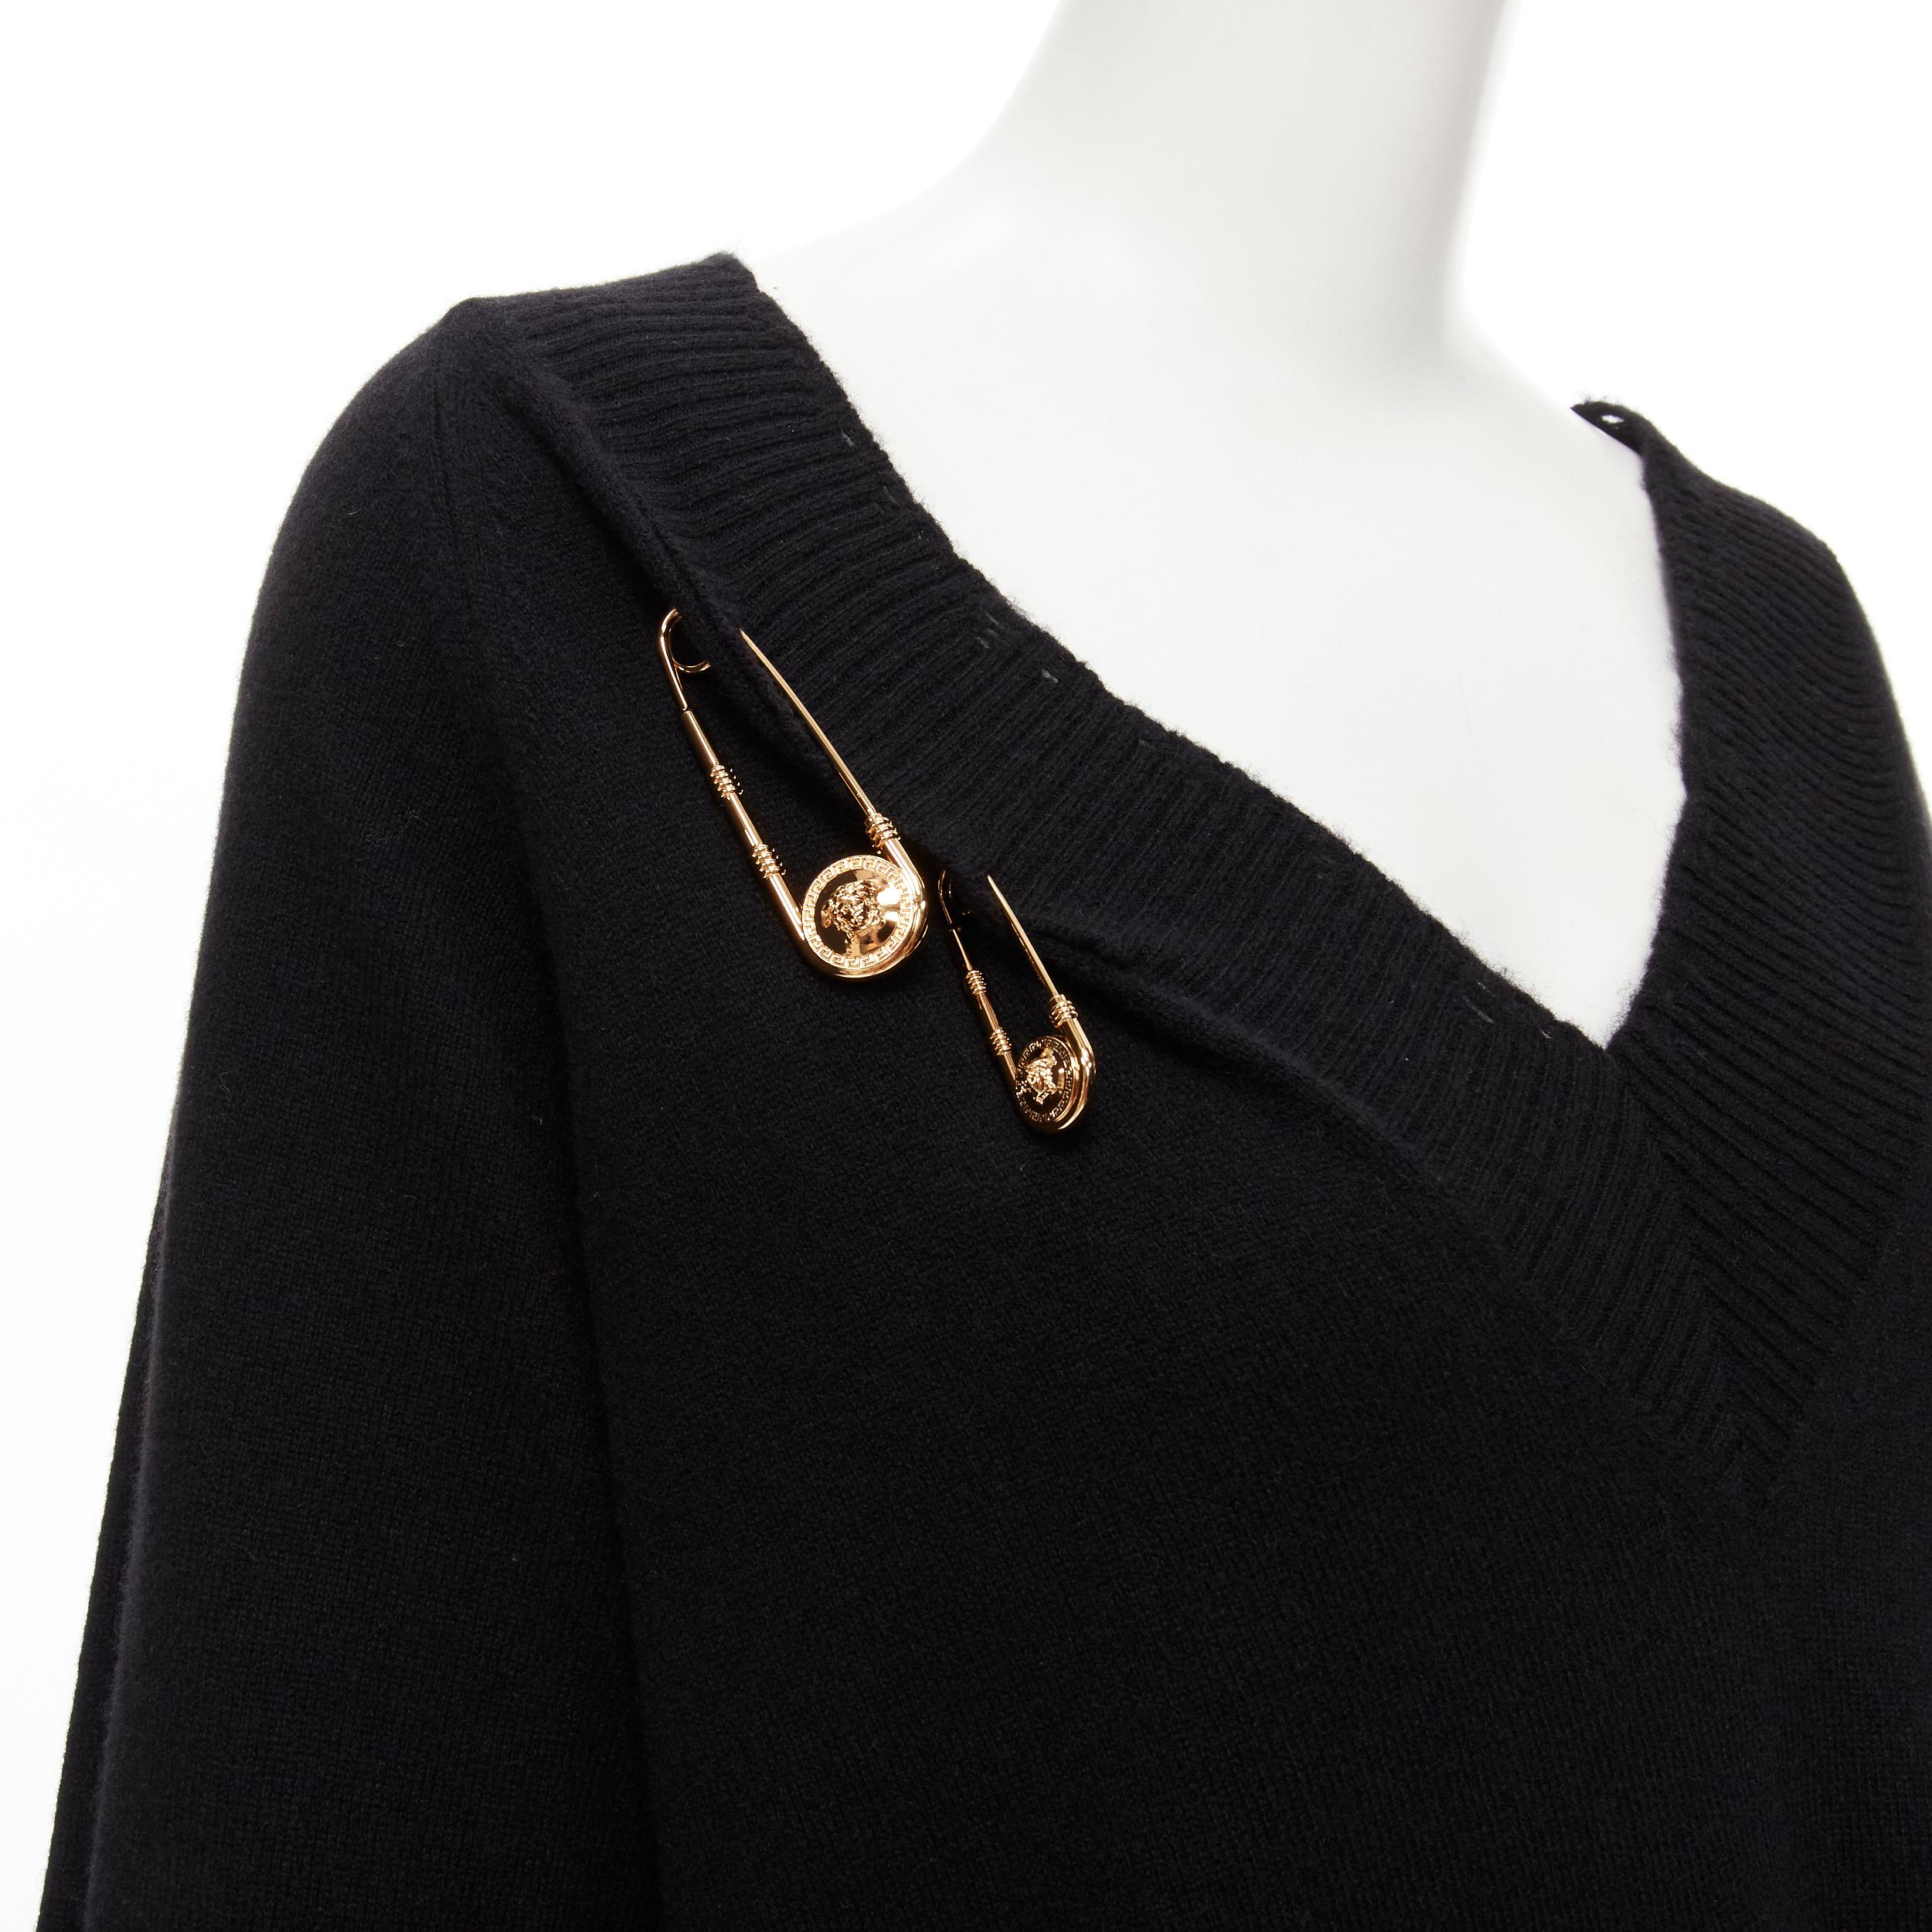 new VERSACE 95% cashmere wool gold Medusa safety pin punk sweater dress IT42 M 
Reference: TGAS/C00178 
Brand: Versace 
Designer: Donatella Versace 
\Material: Cashmere 
Color: Black 
Pattern: Solid 
Extra Detail: 95% cashmere, 5% wool. Black